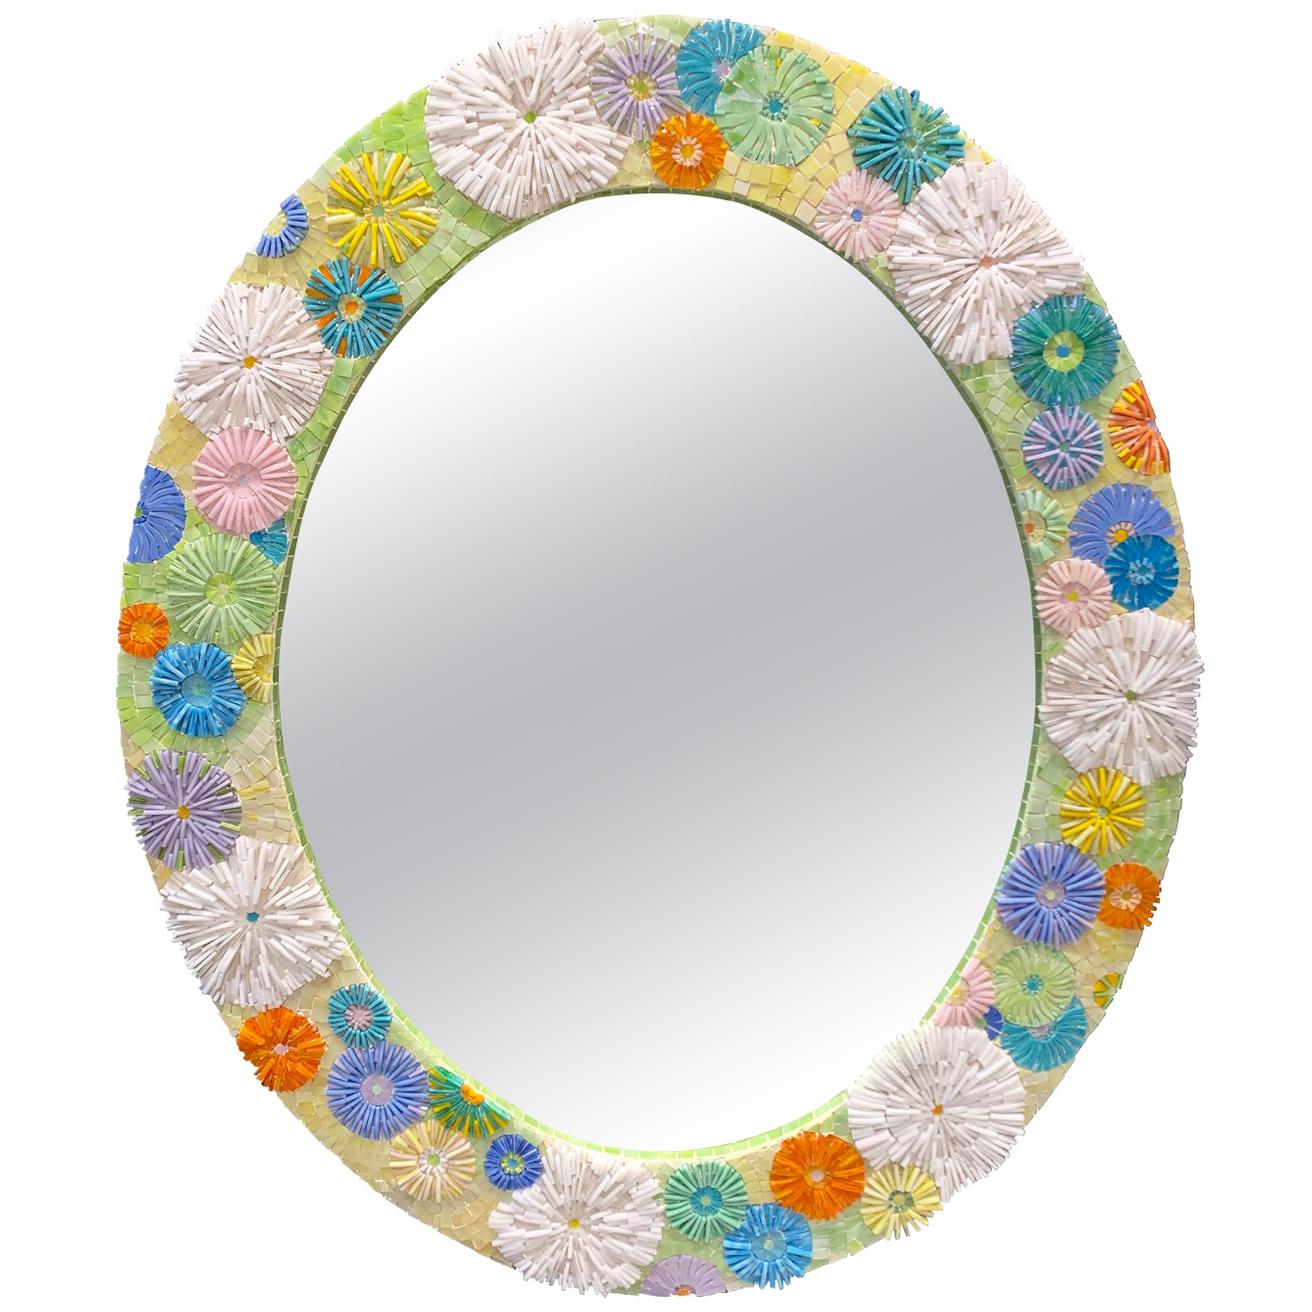 Customizable Pastel Blossom Glass Flower Mosaic Oval Mirror by Ercole Home